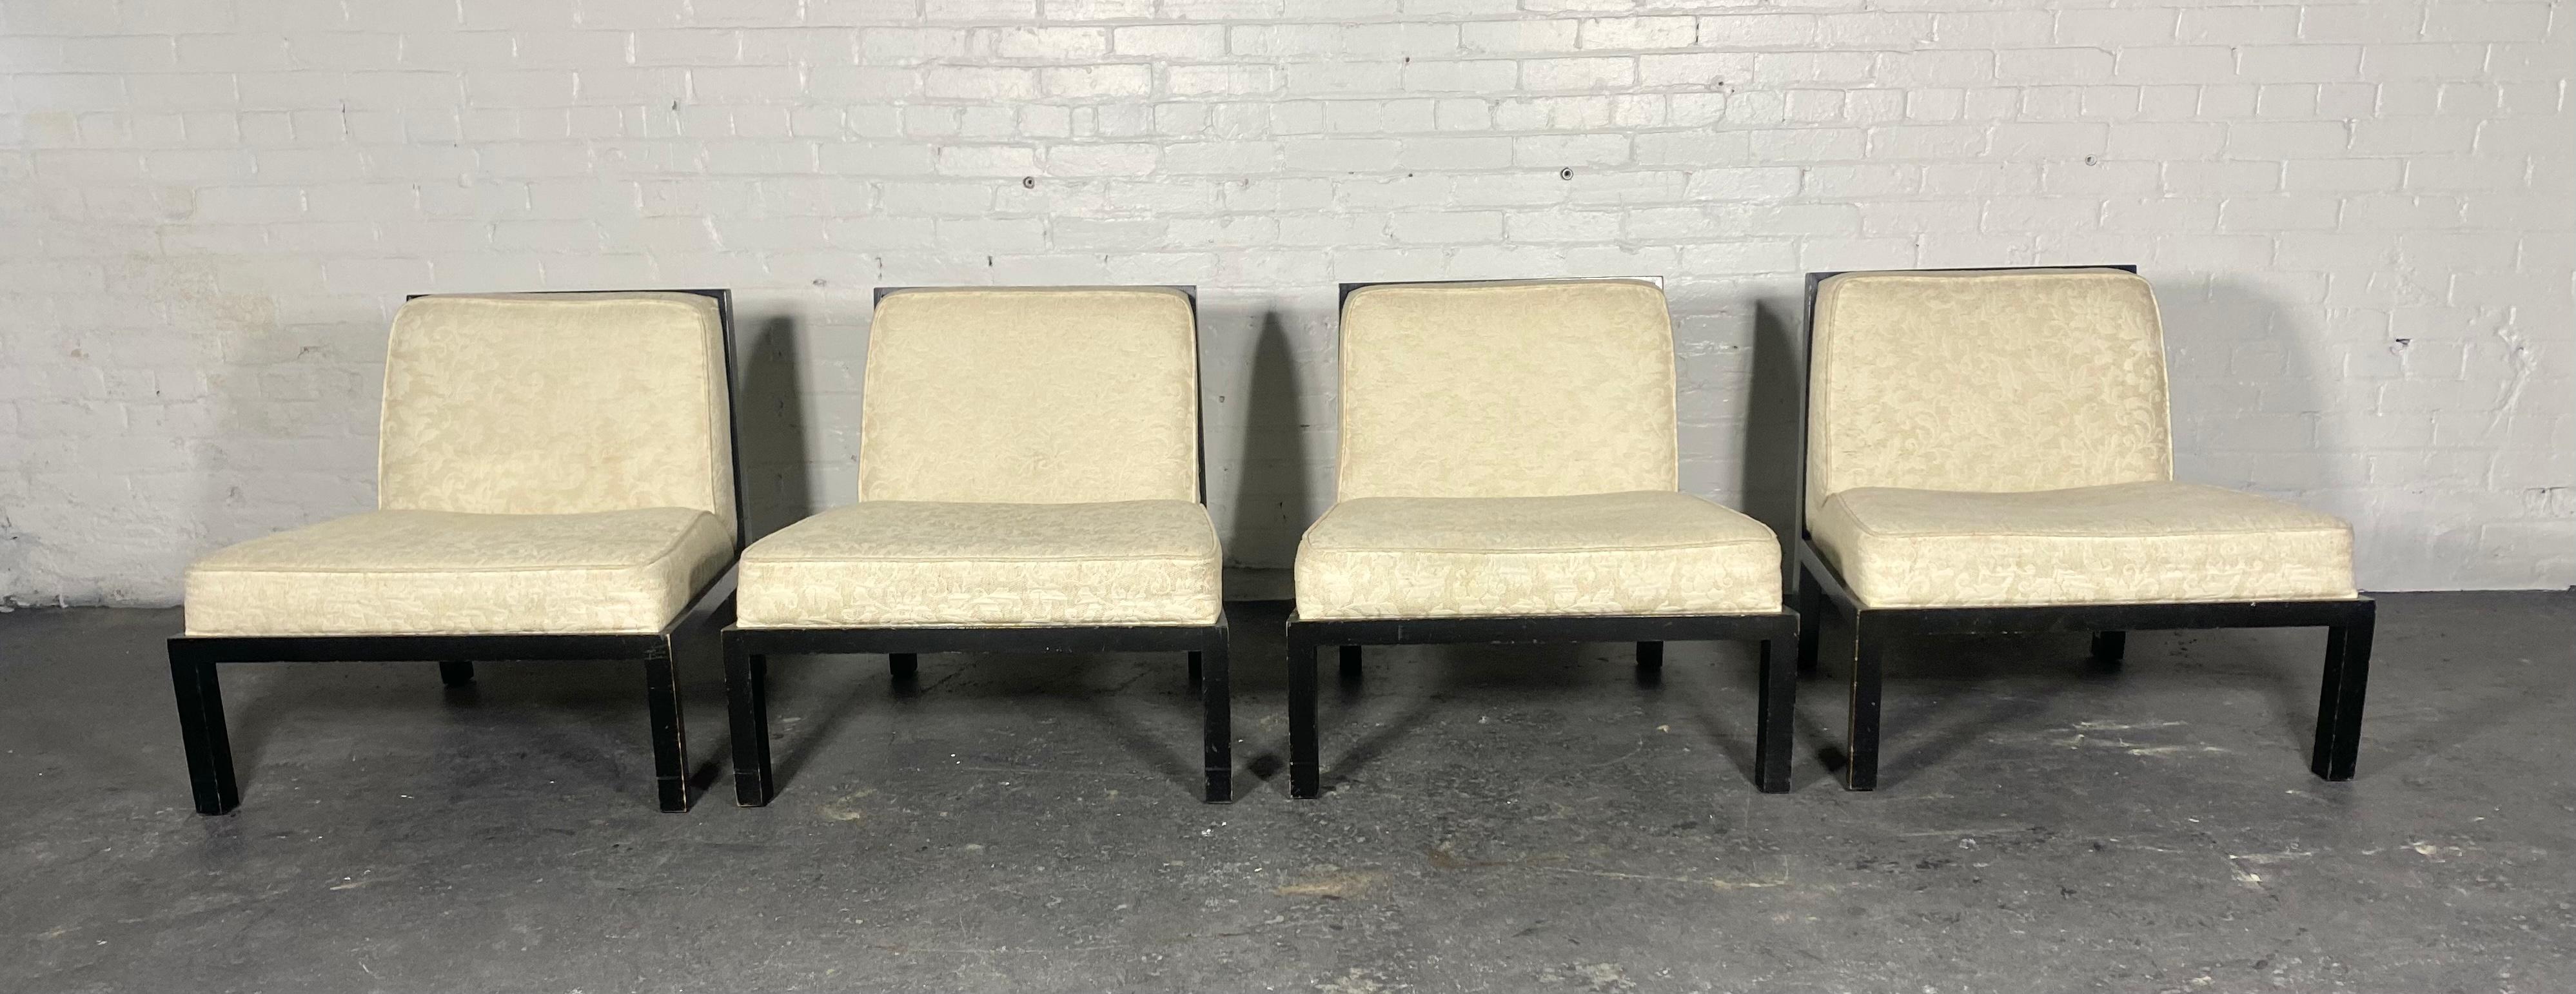 Set of 4 Matching American mid-century slipper chairs with wood lacquered frames with rectangular grid designed back and square legs, with fabric upholstered seat and back cushions. Classic modernist design,Superior quality and construction.. Retain